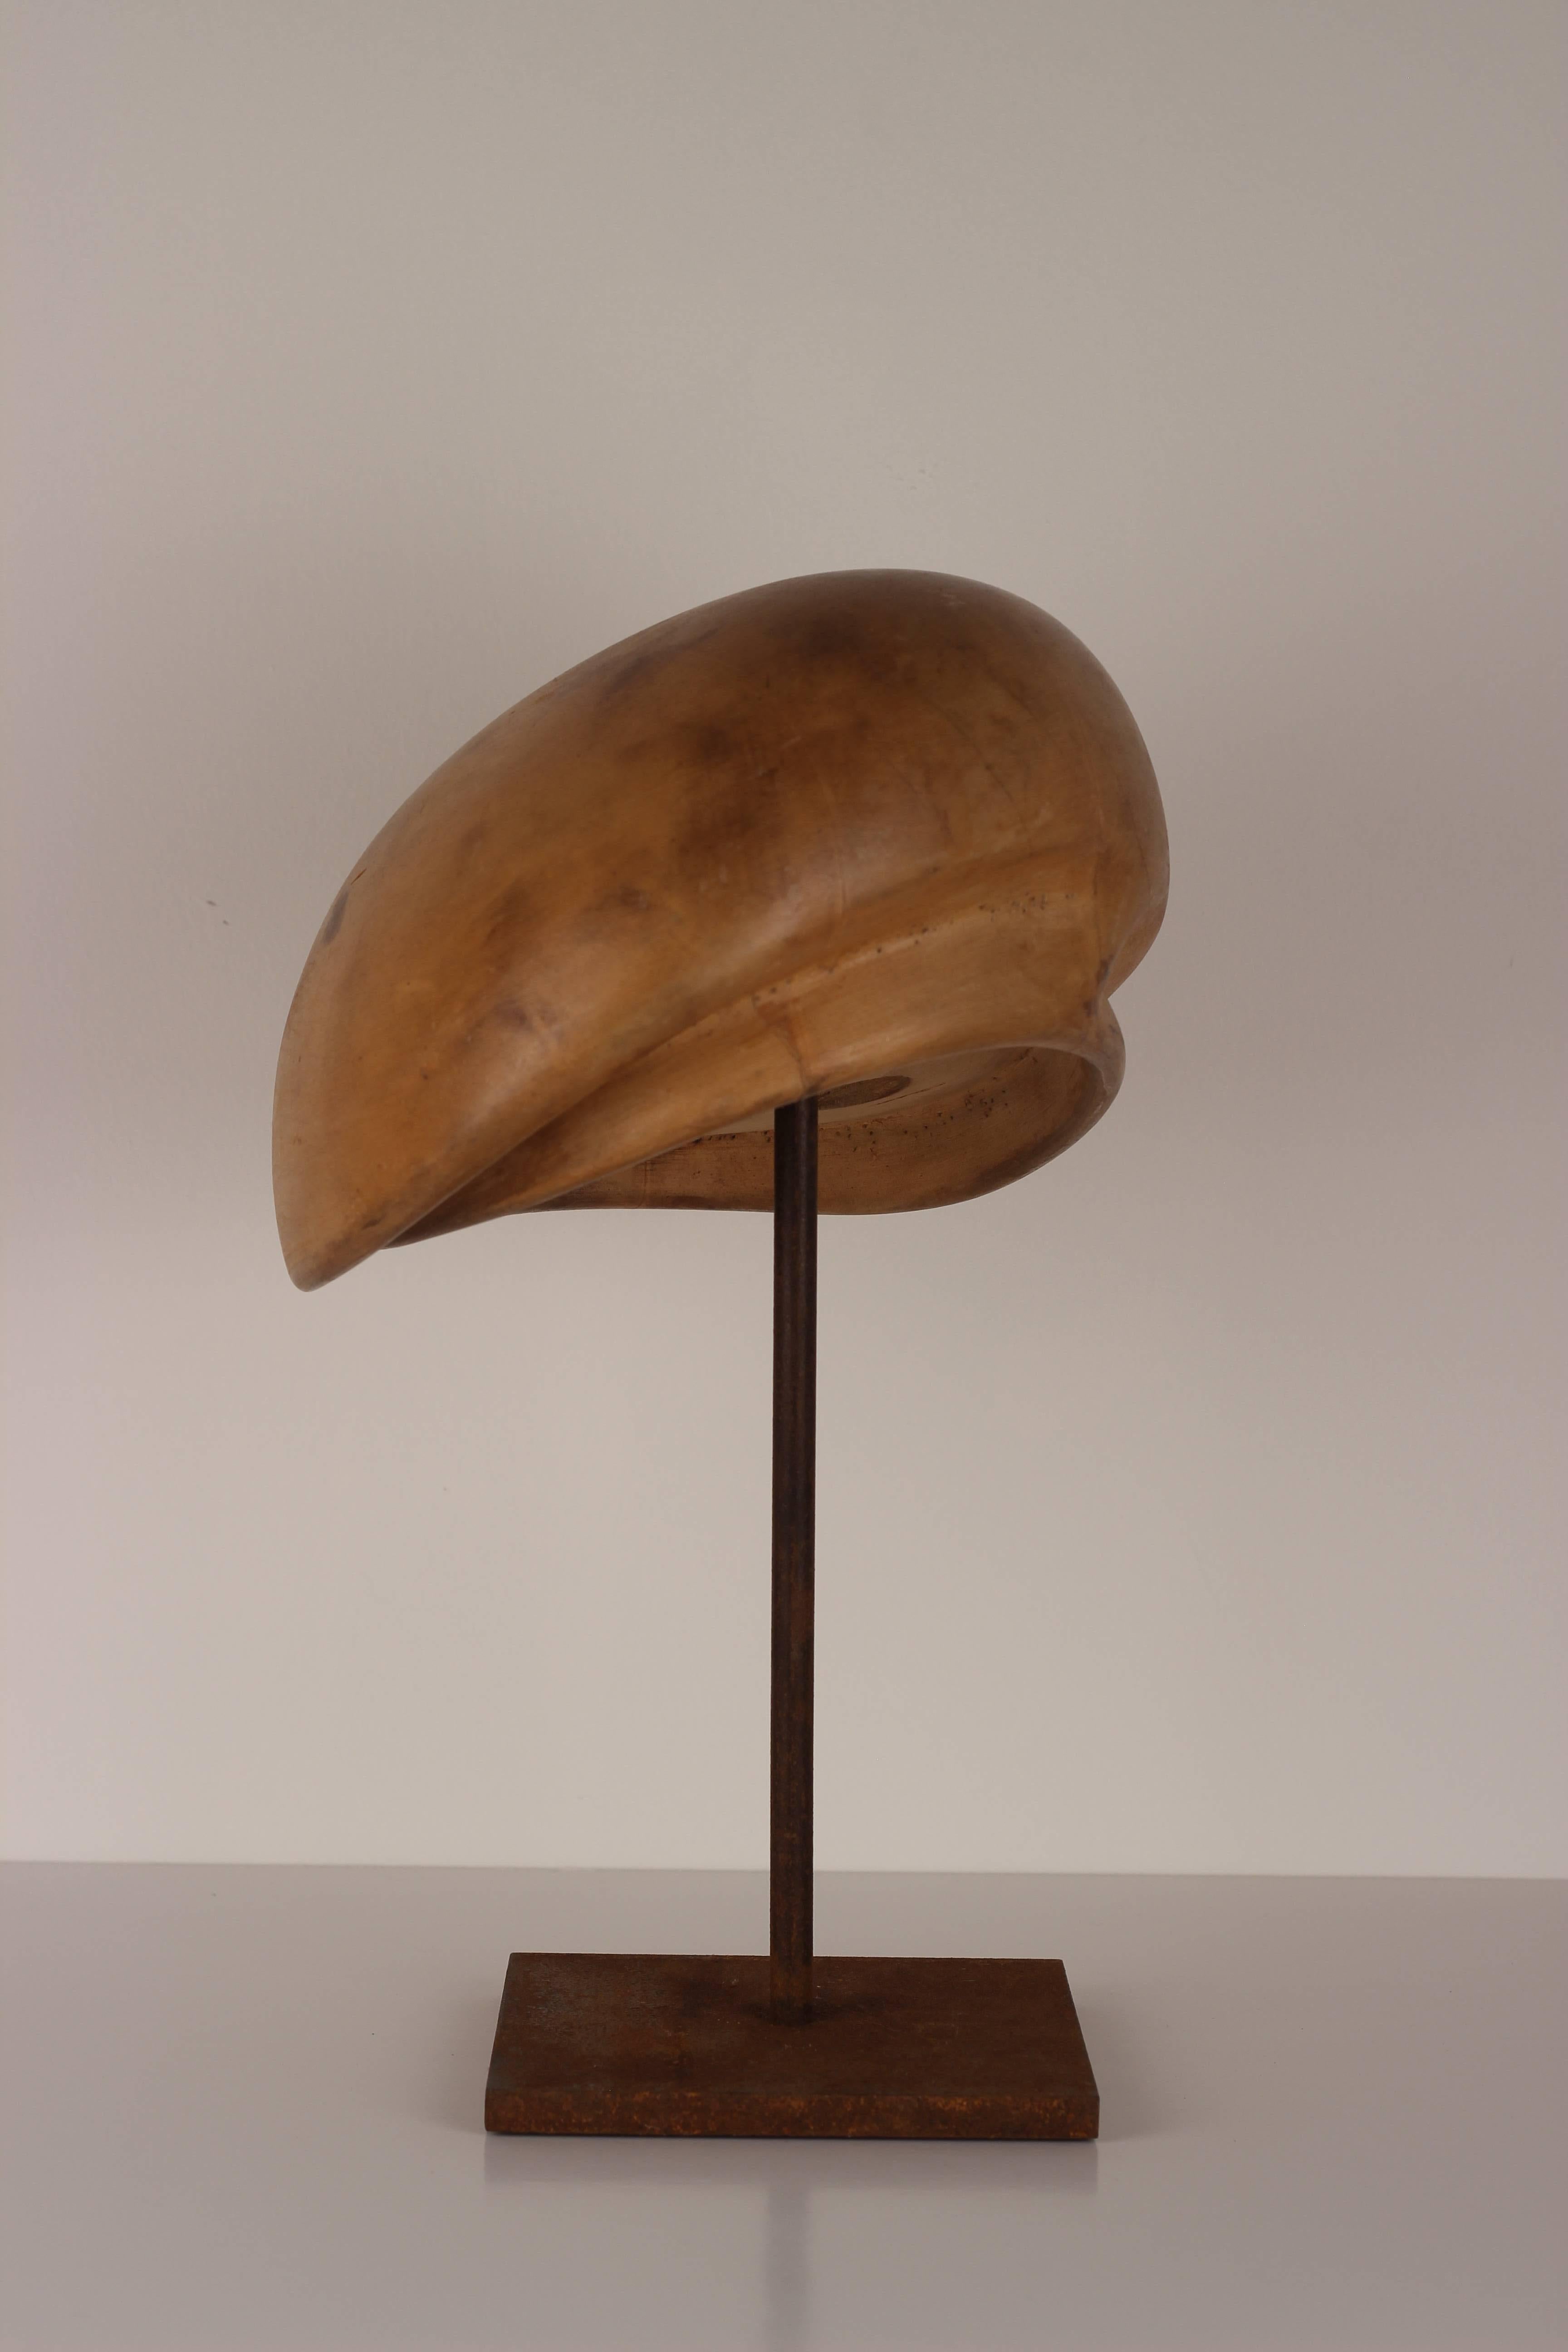 Italian Early 20th Century Milliner Wooden Hat Block from Florence, Italy